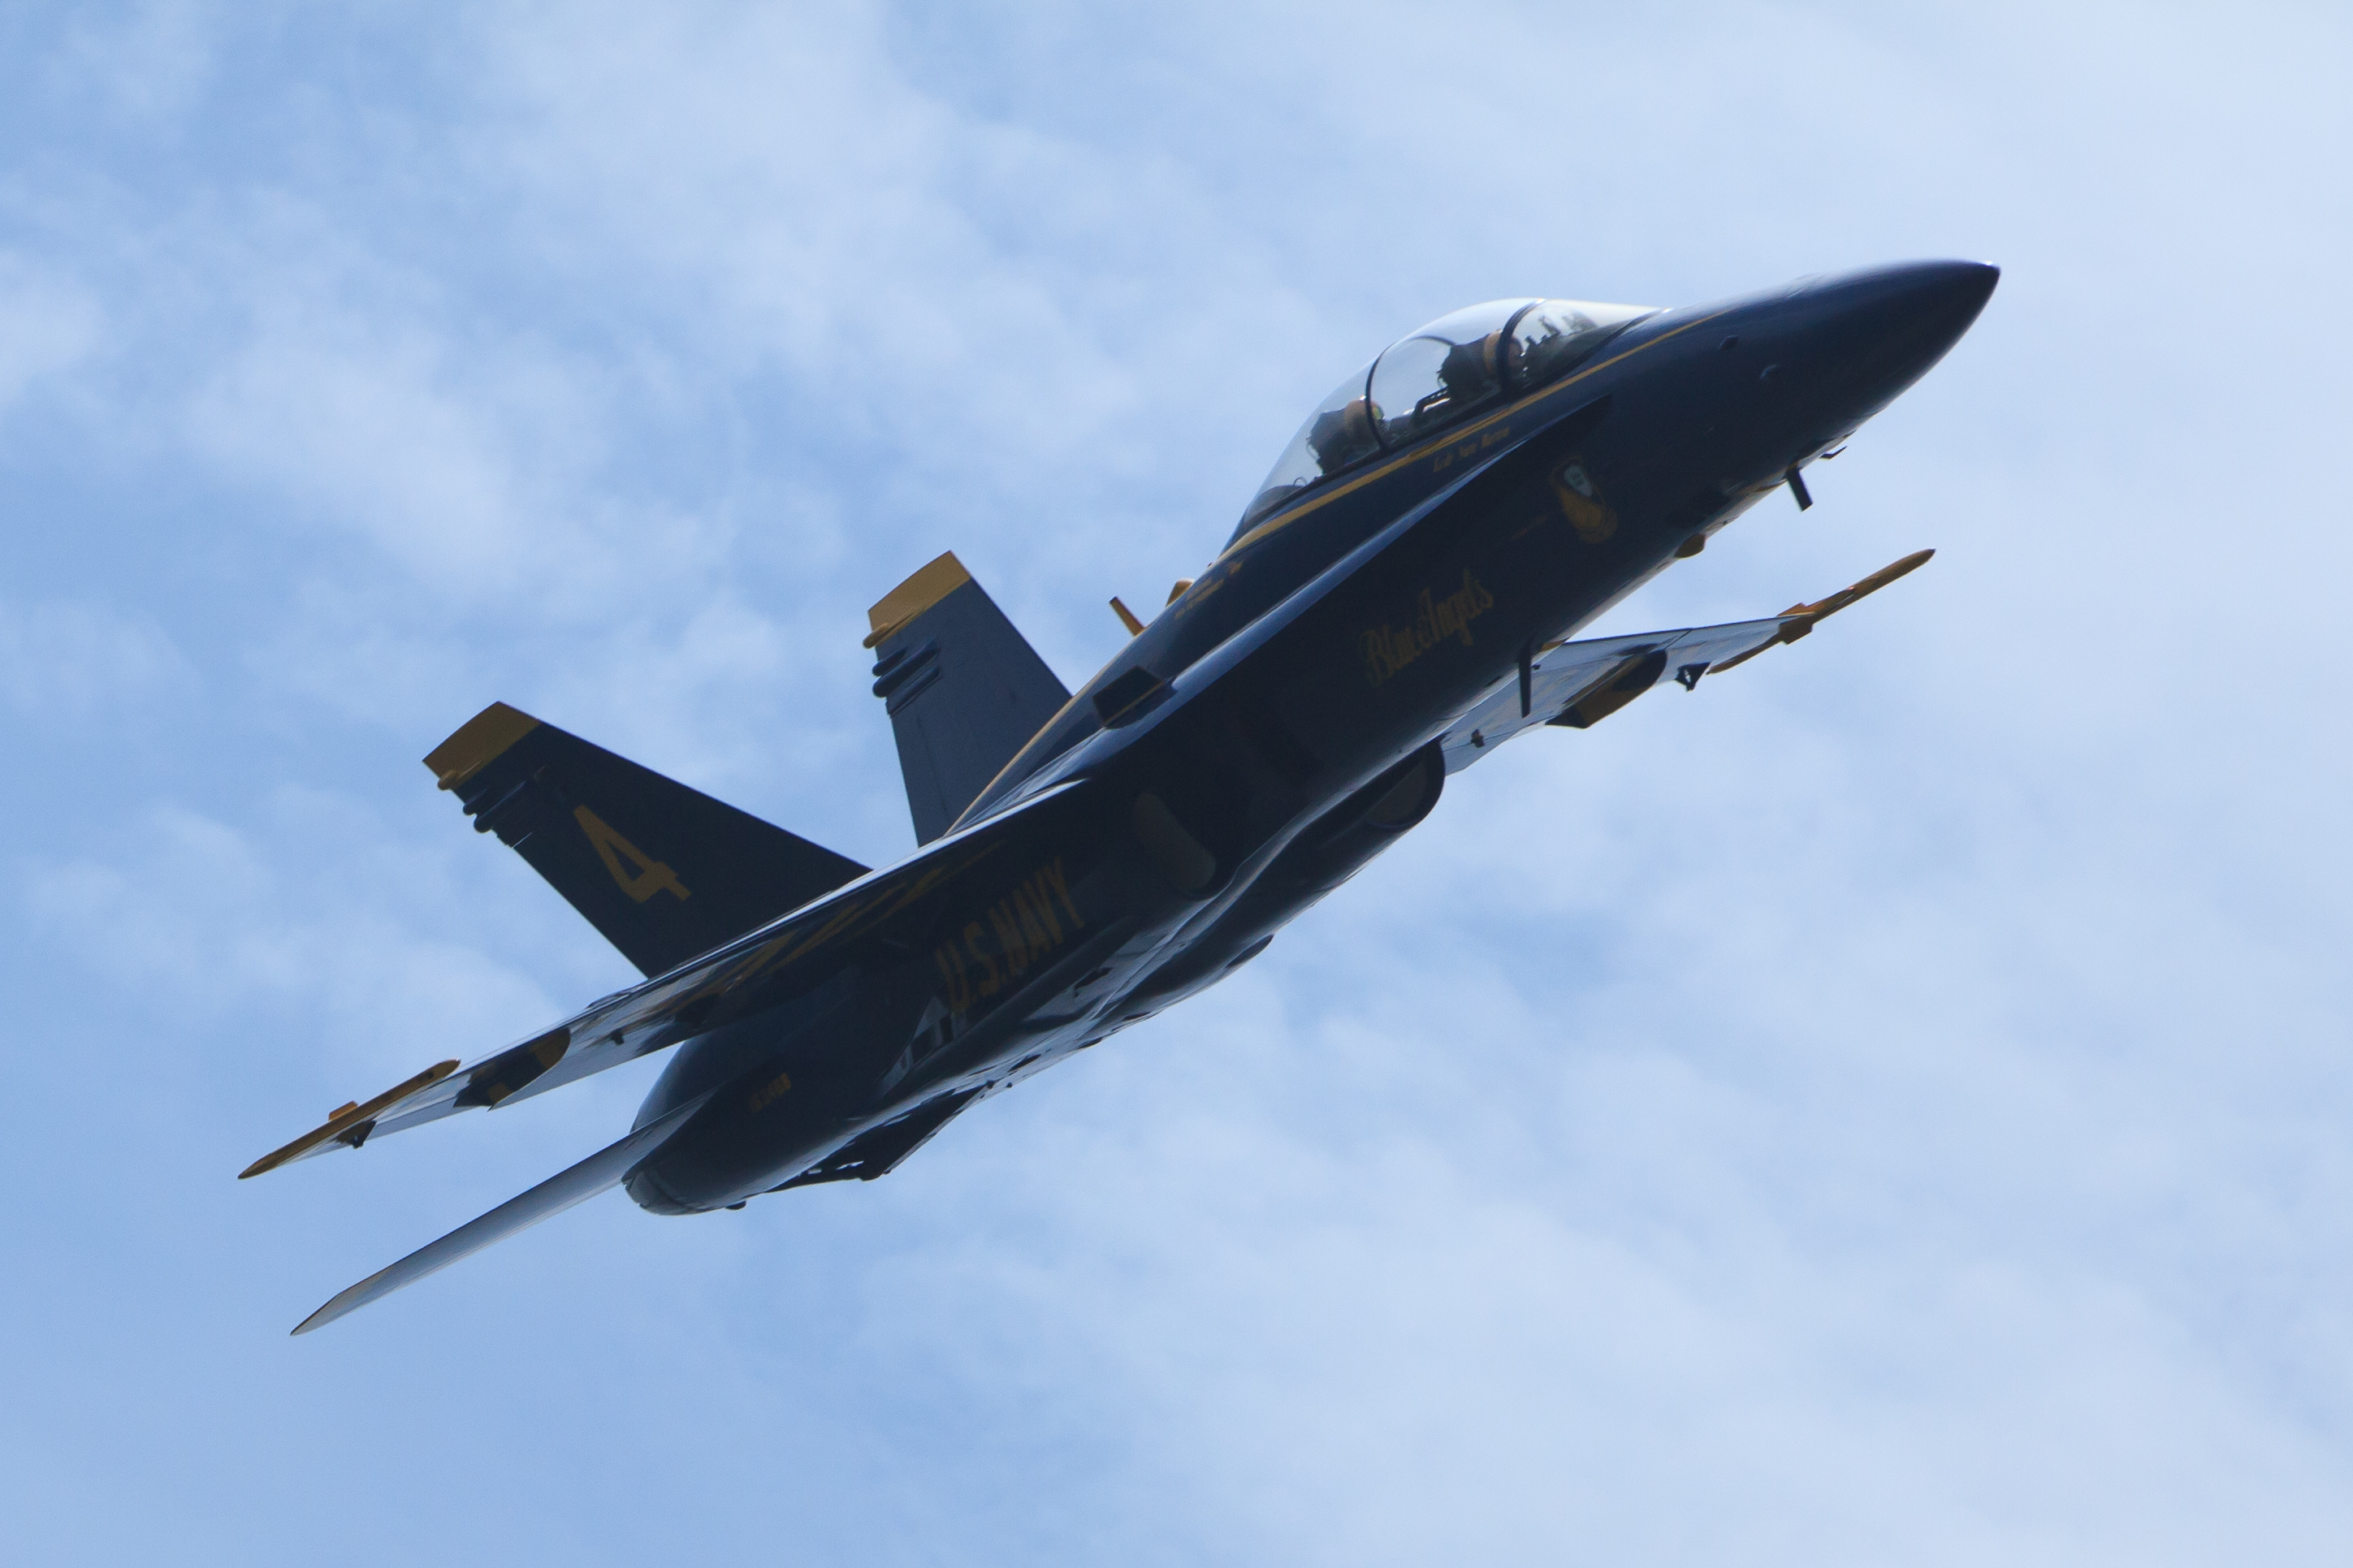 Close up picture of a Blue Angel Jet flying in a blue sky